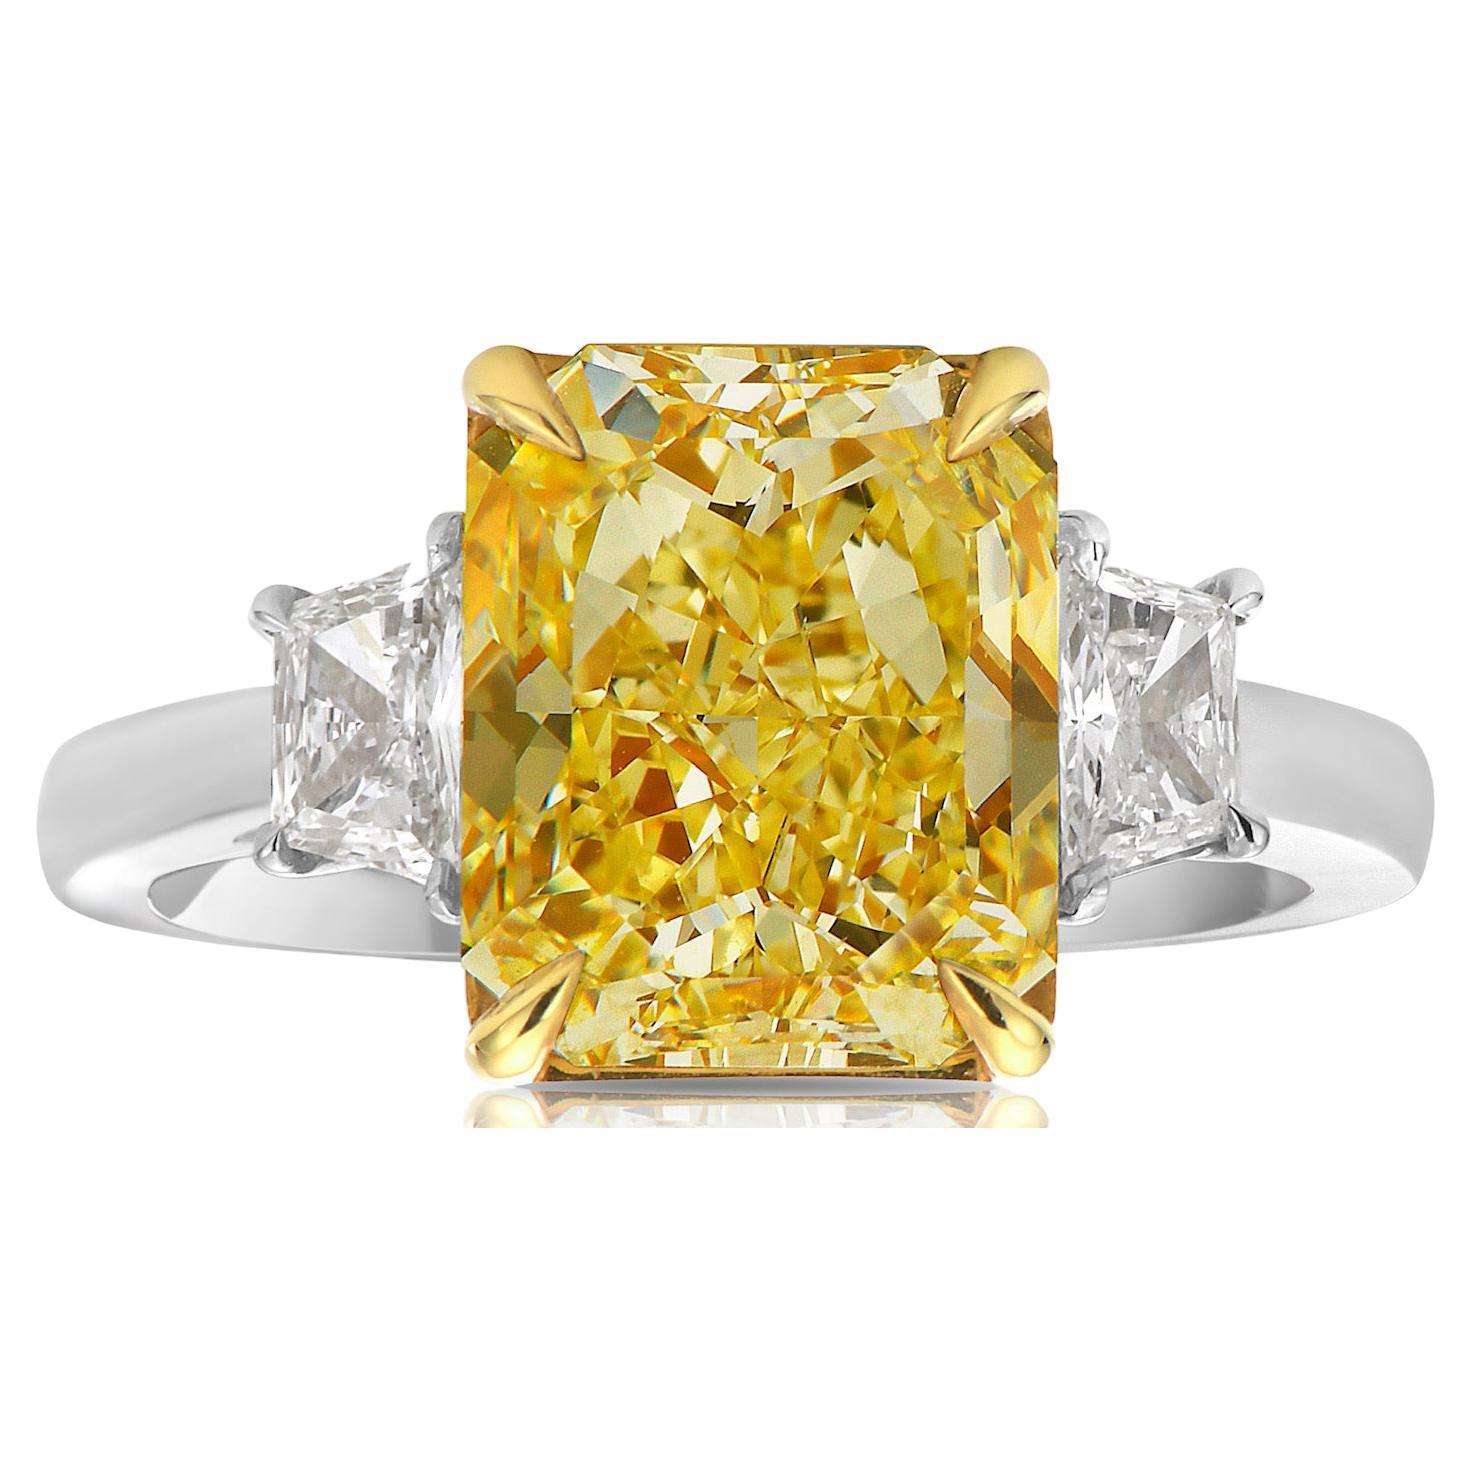 5.34ct Fancy Light Yellow VS2 GIA Ring For Sale